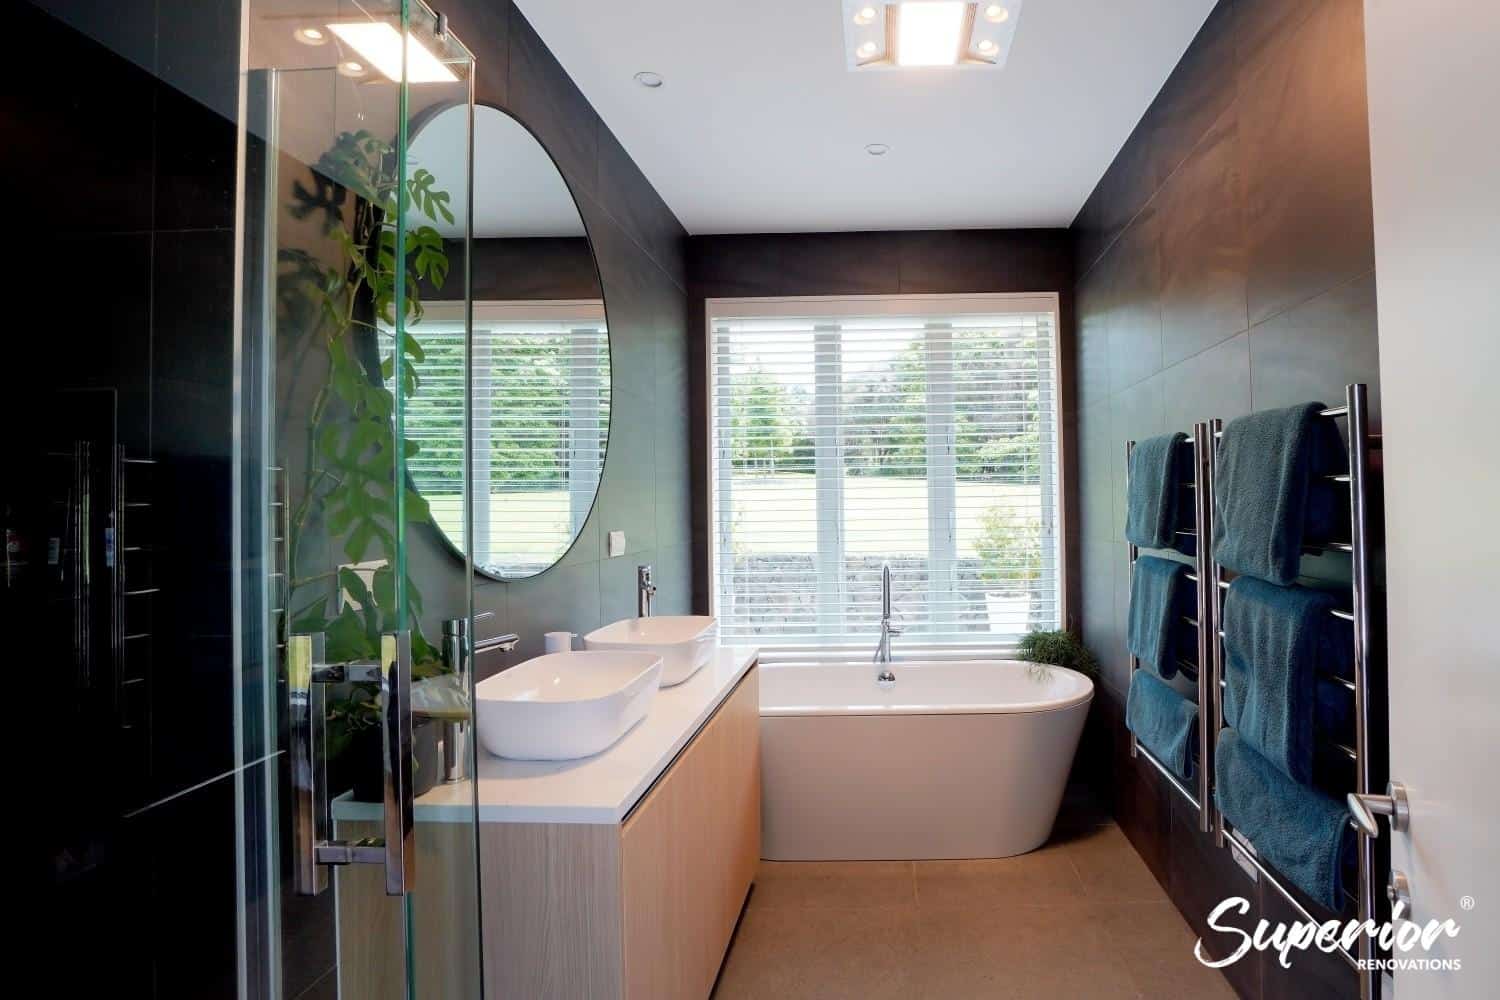 Making The Most Out Of Your Small Bathroom Design Mistakes to Avoid